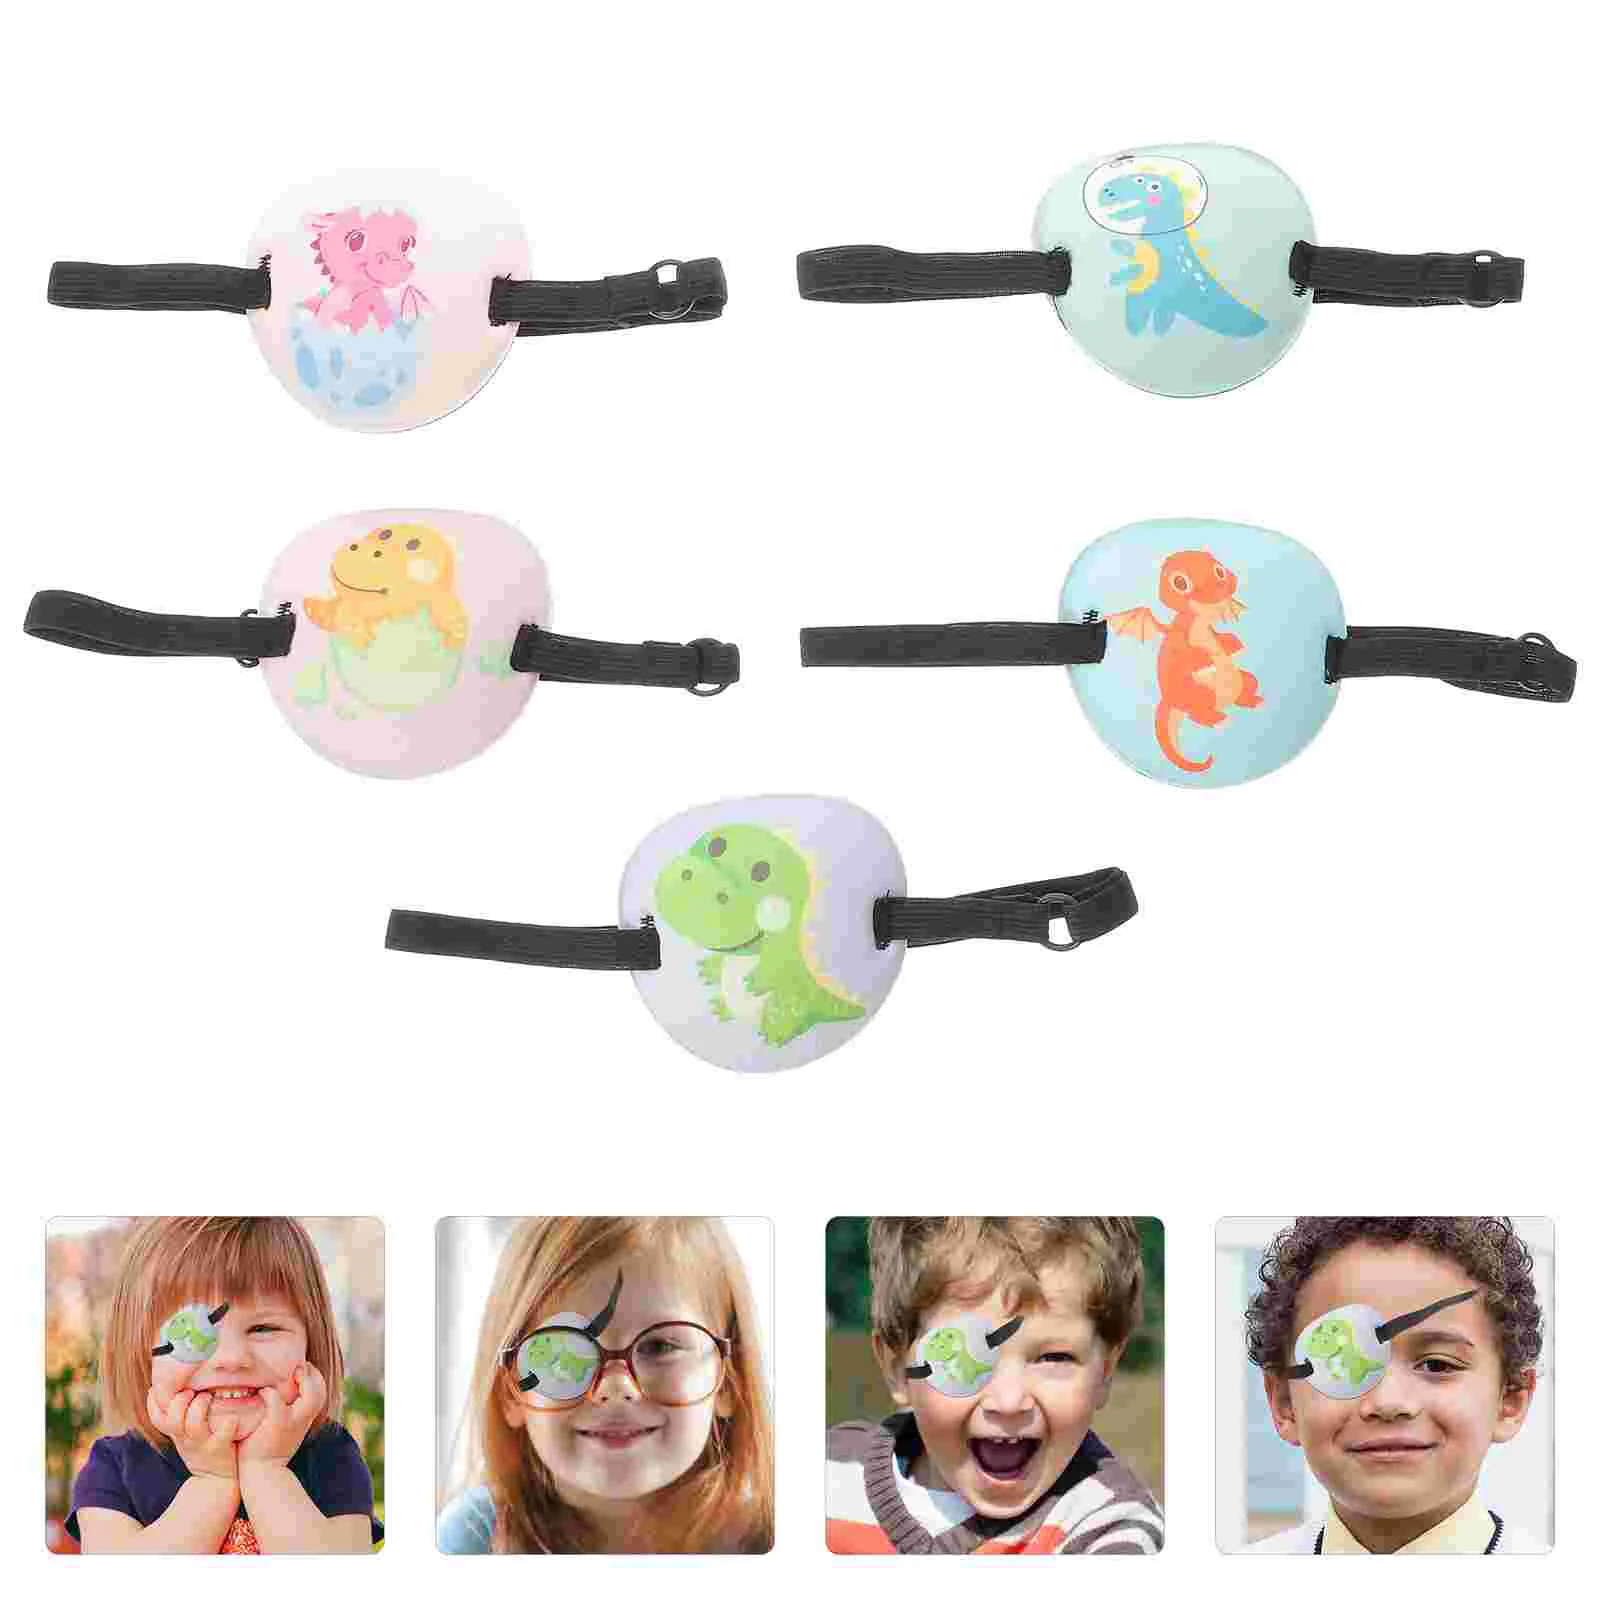 

5 Pcs Amblyopia Cyclops Eyeglass Patch Safety Goggles Kids Strabismus Patches Lazy Left Eyepatch Pirate Masks Adults Soft 3d